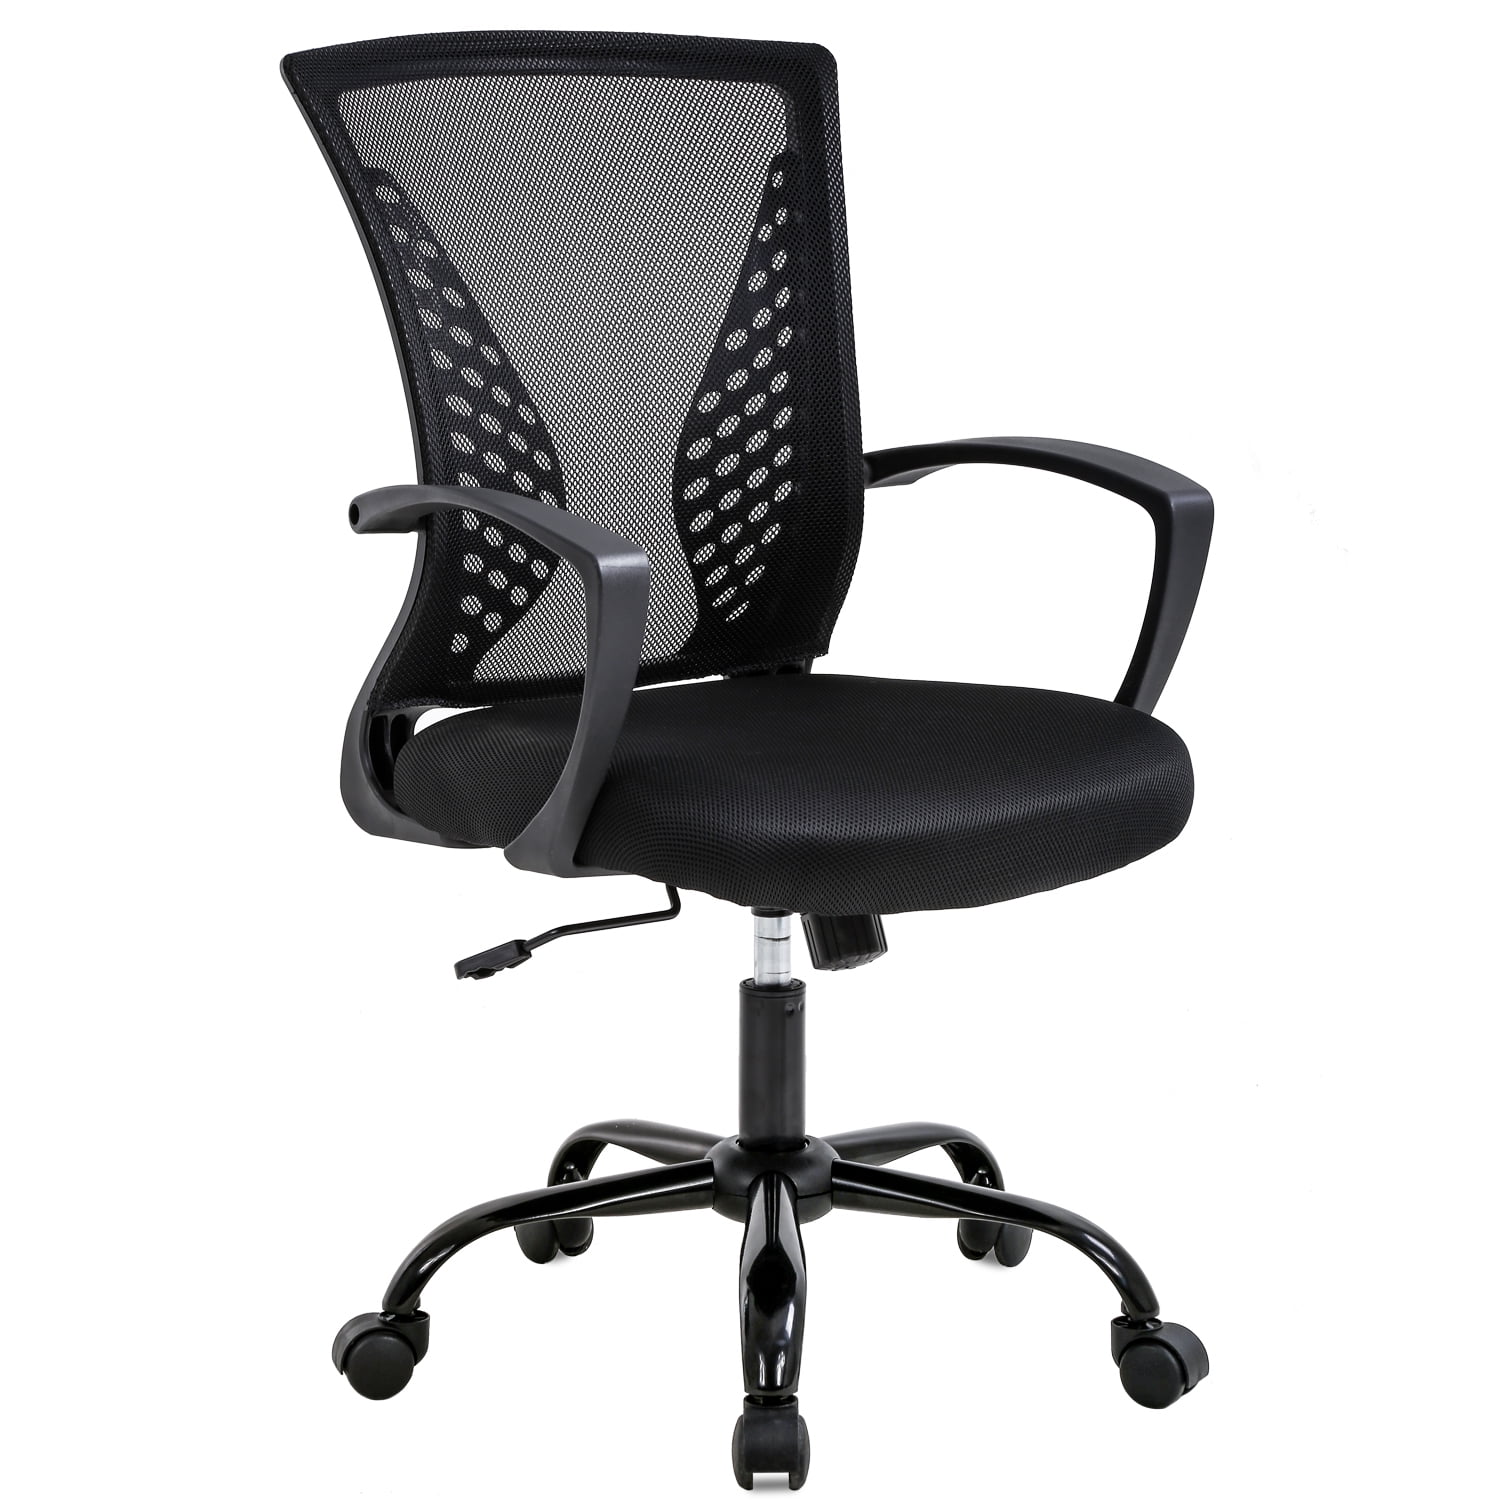 XELO OFFICE DESK CHAIR MID-BACK MESH TASK CHAIR ADJUSTABLE 4 COLORS Details about   NEW 